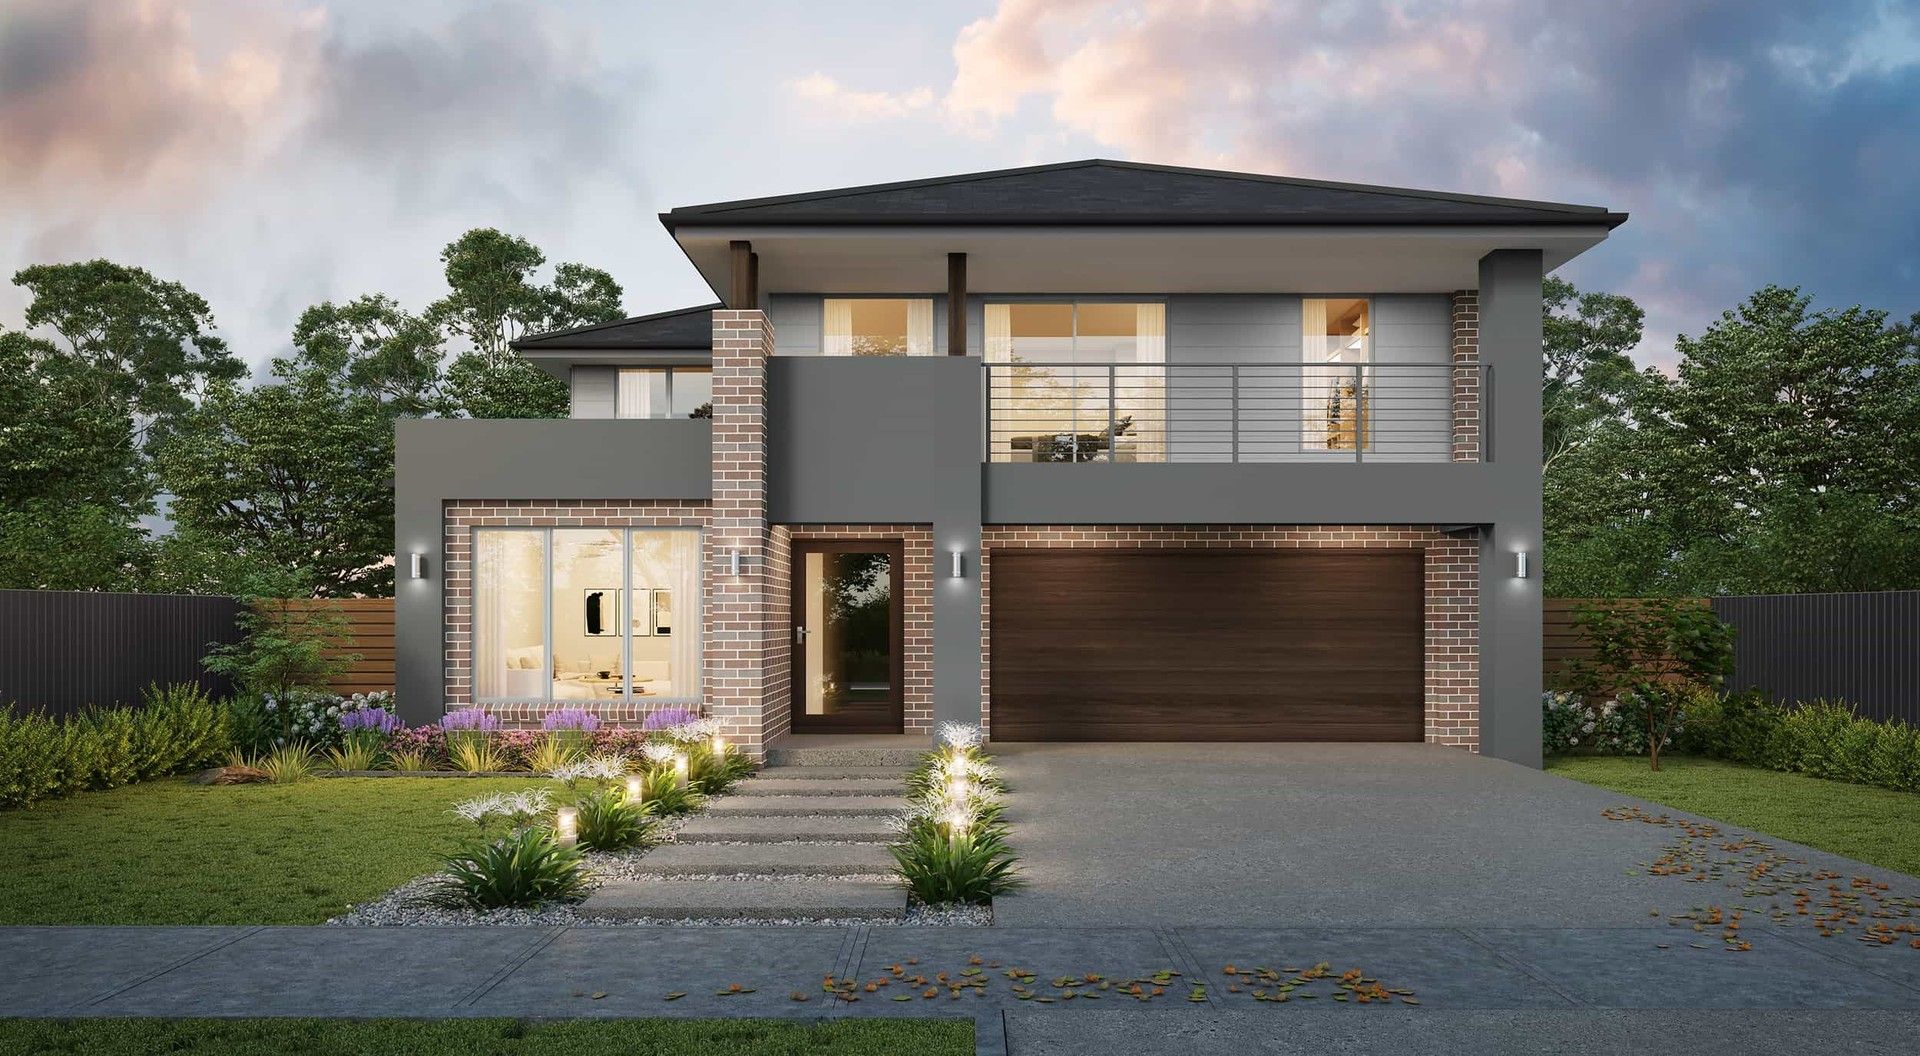 5 bedrooms New Home Designs in  CADDENS NSW, 2747